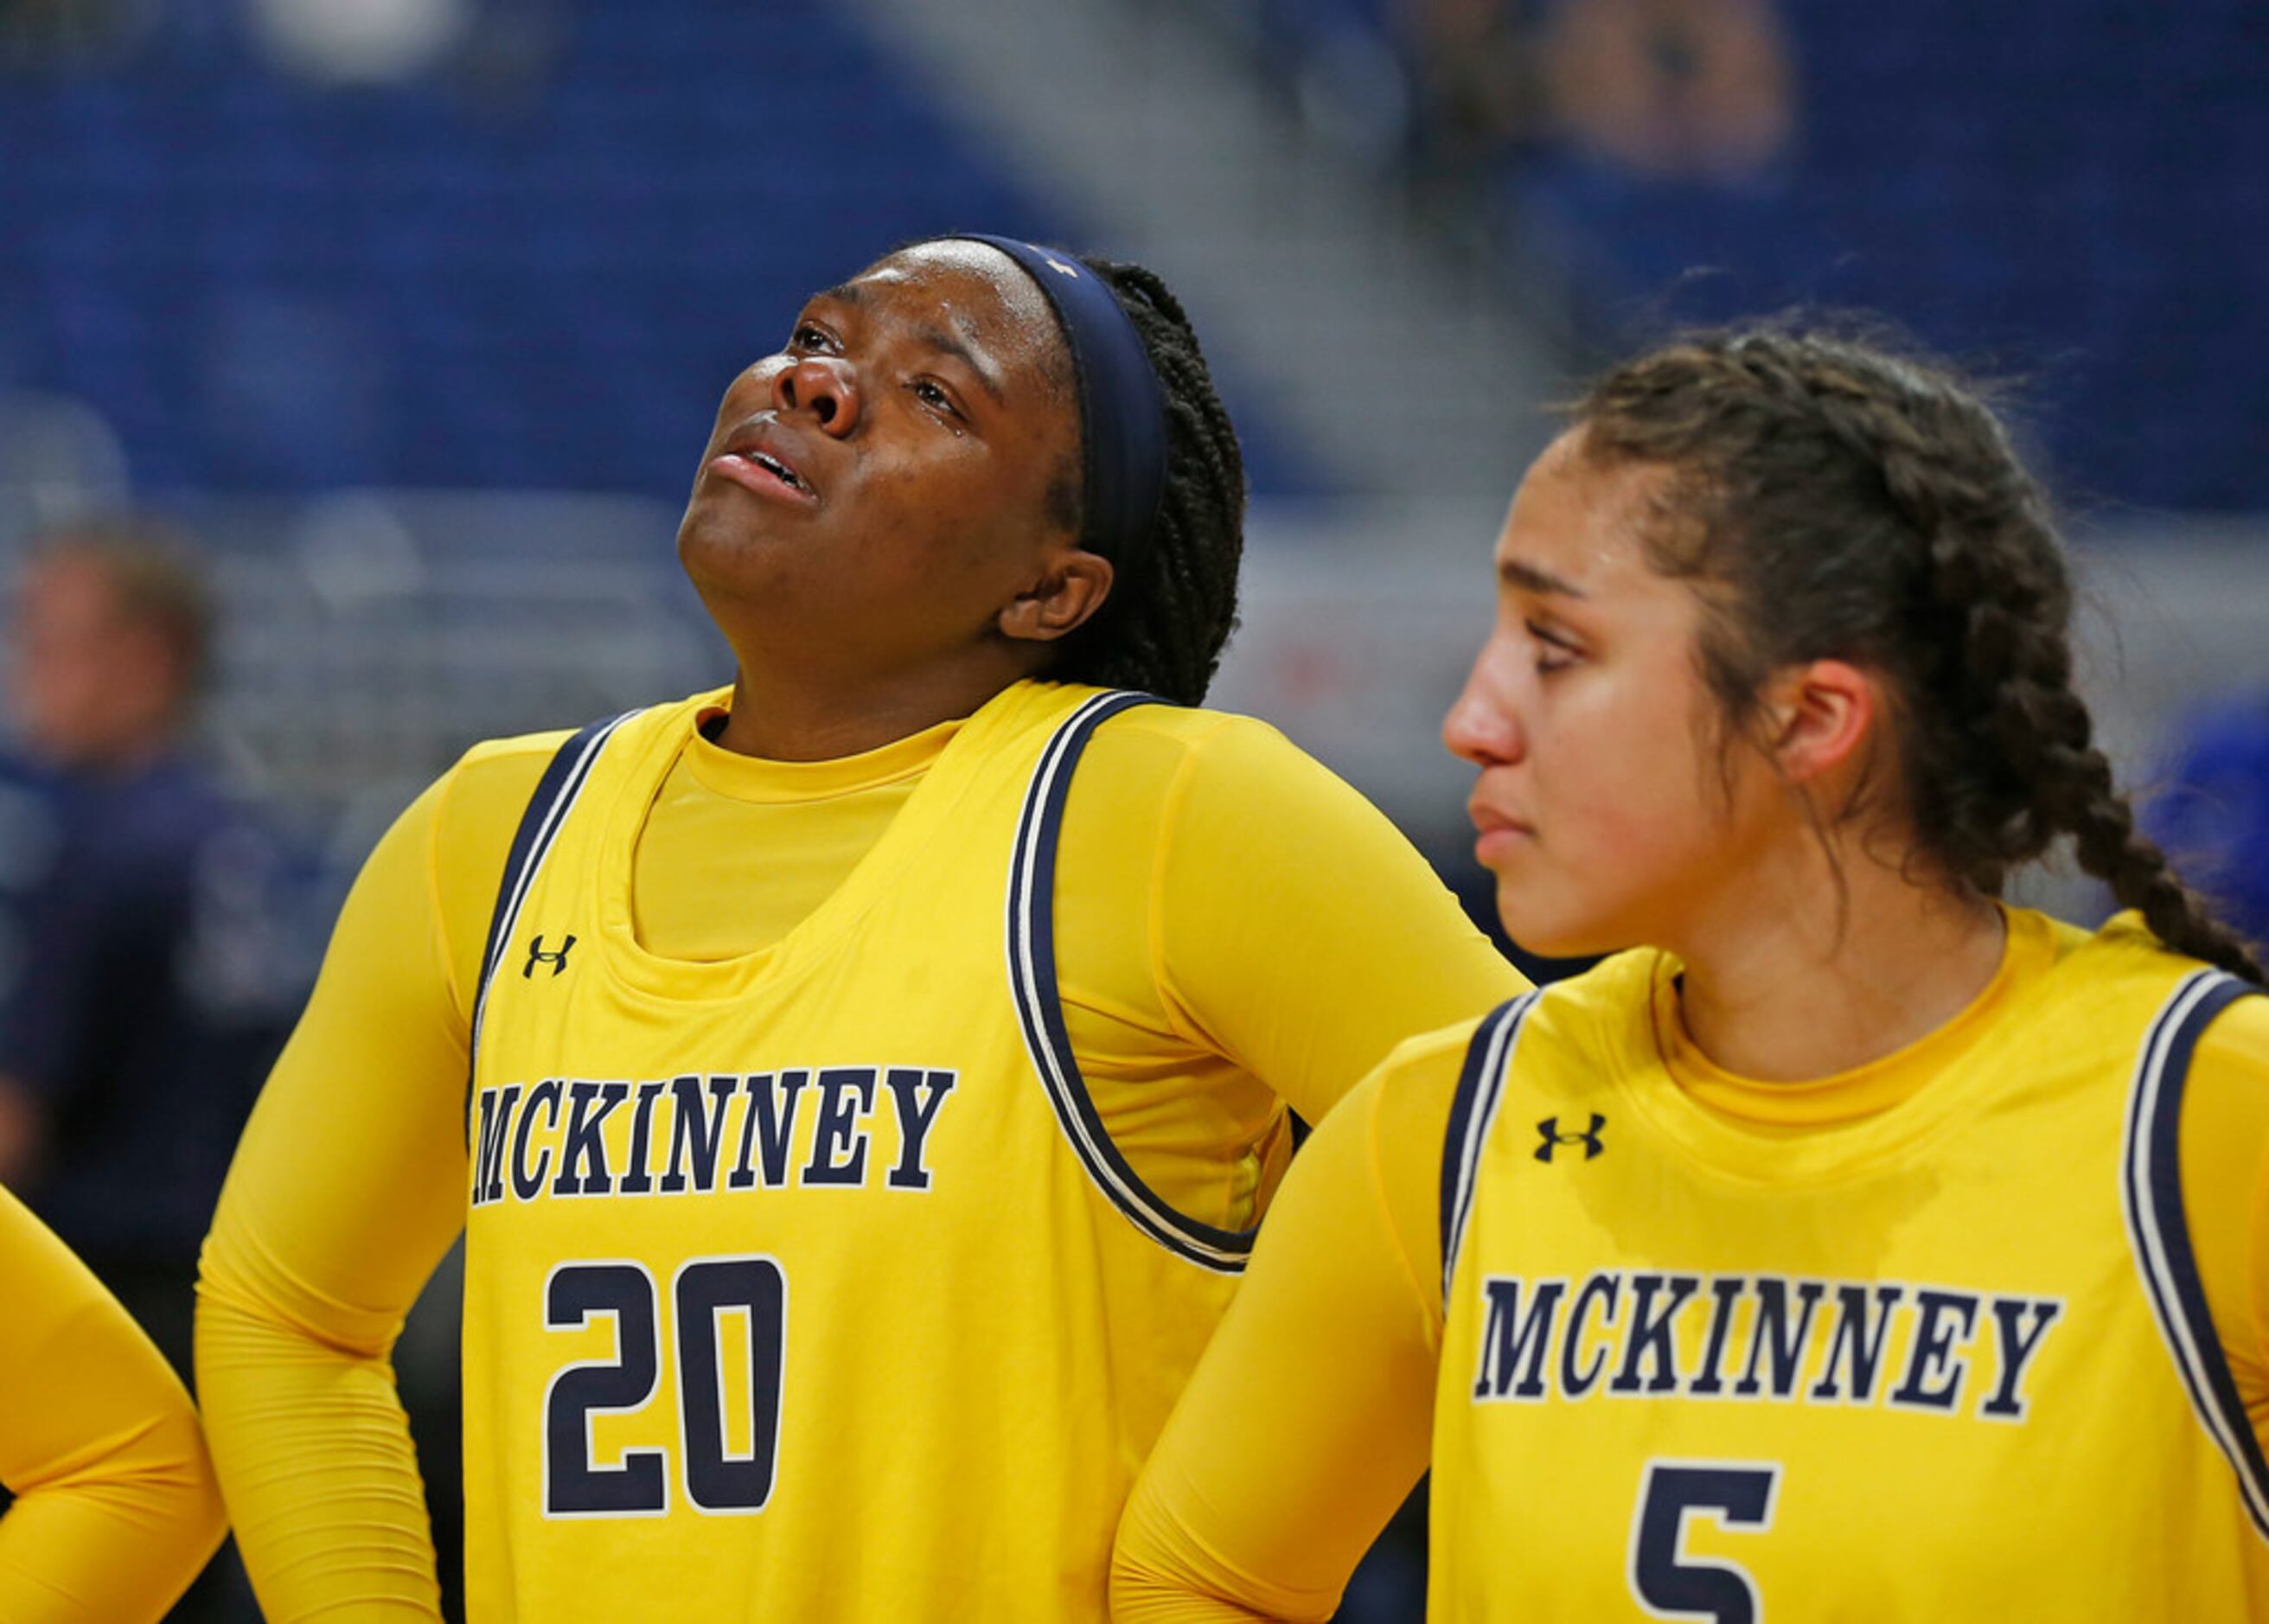 McKinney forward Naomi Anamekwe #20 can hold back tears after losing to Cypress Creek in 6A...